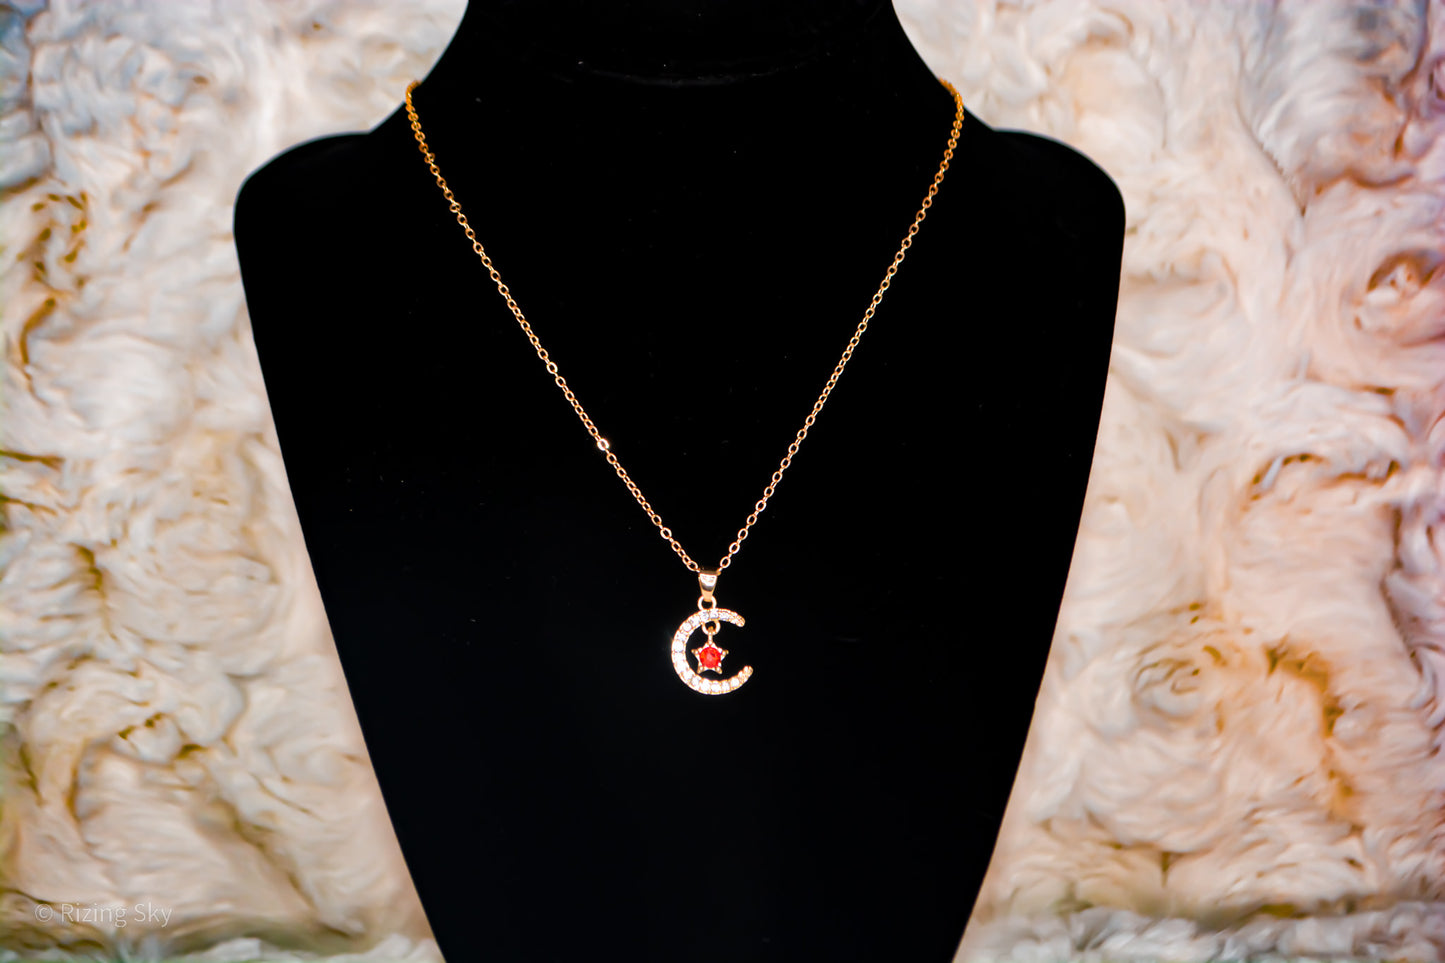 Birthstone Star and Moon Necklace